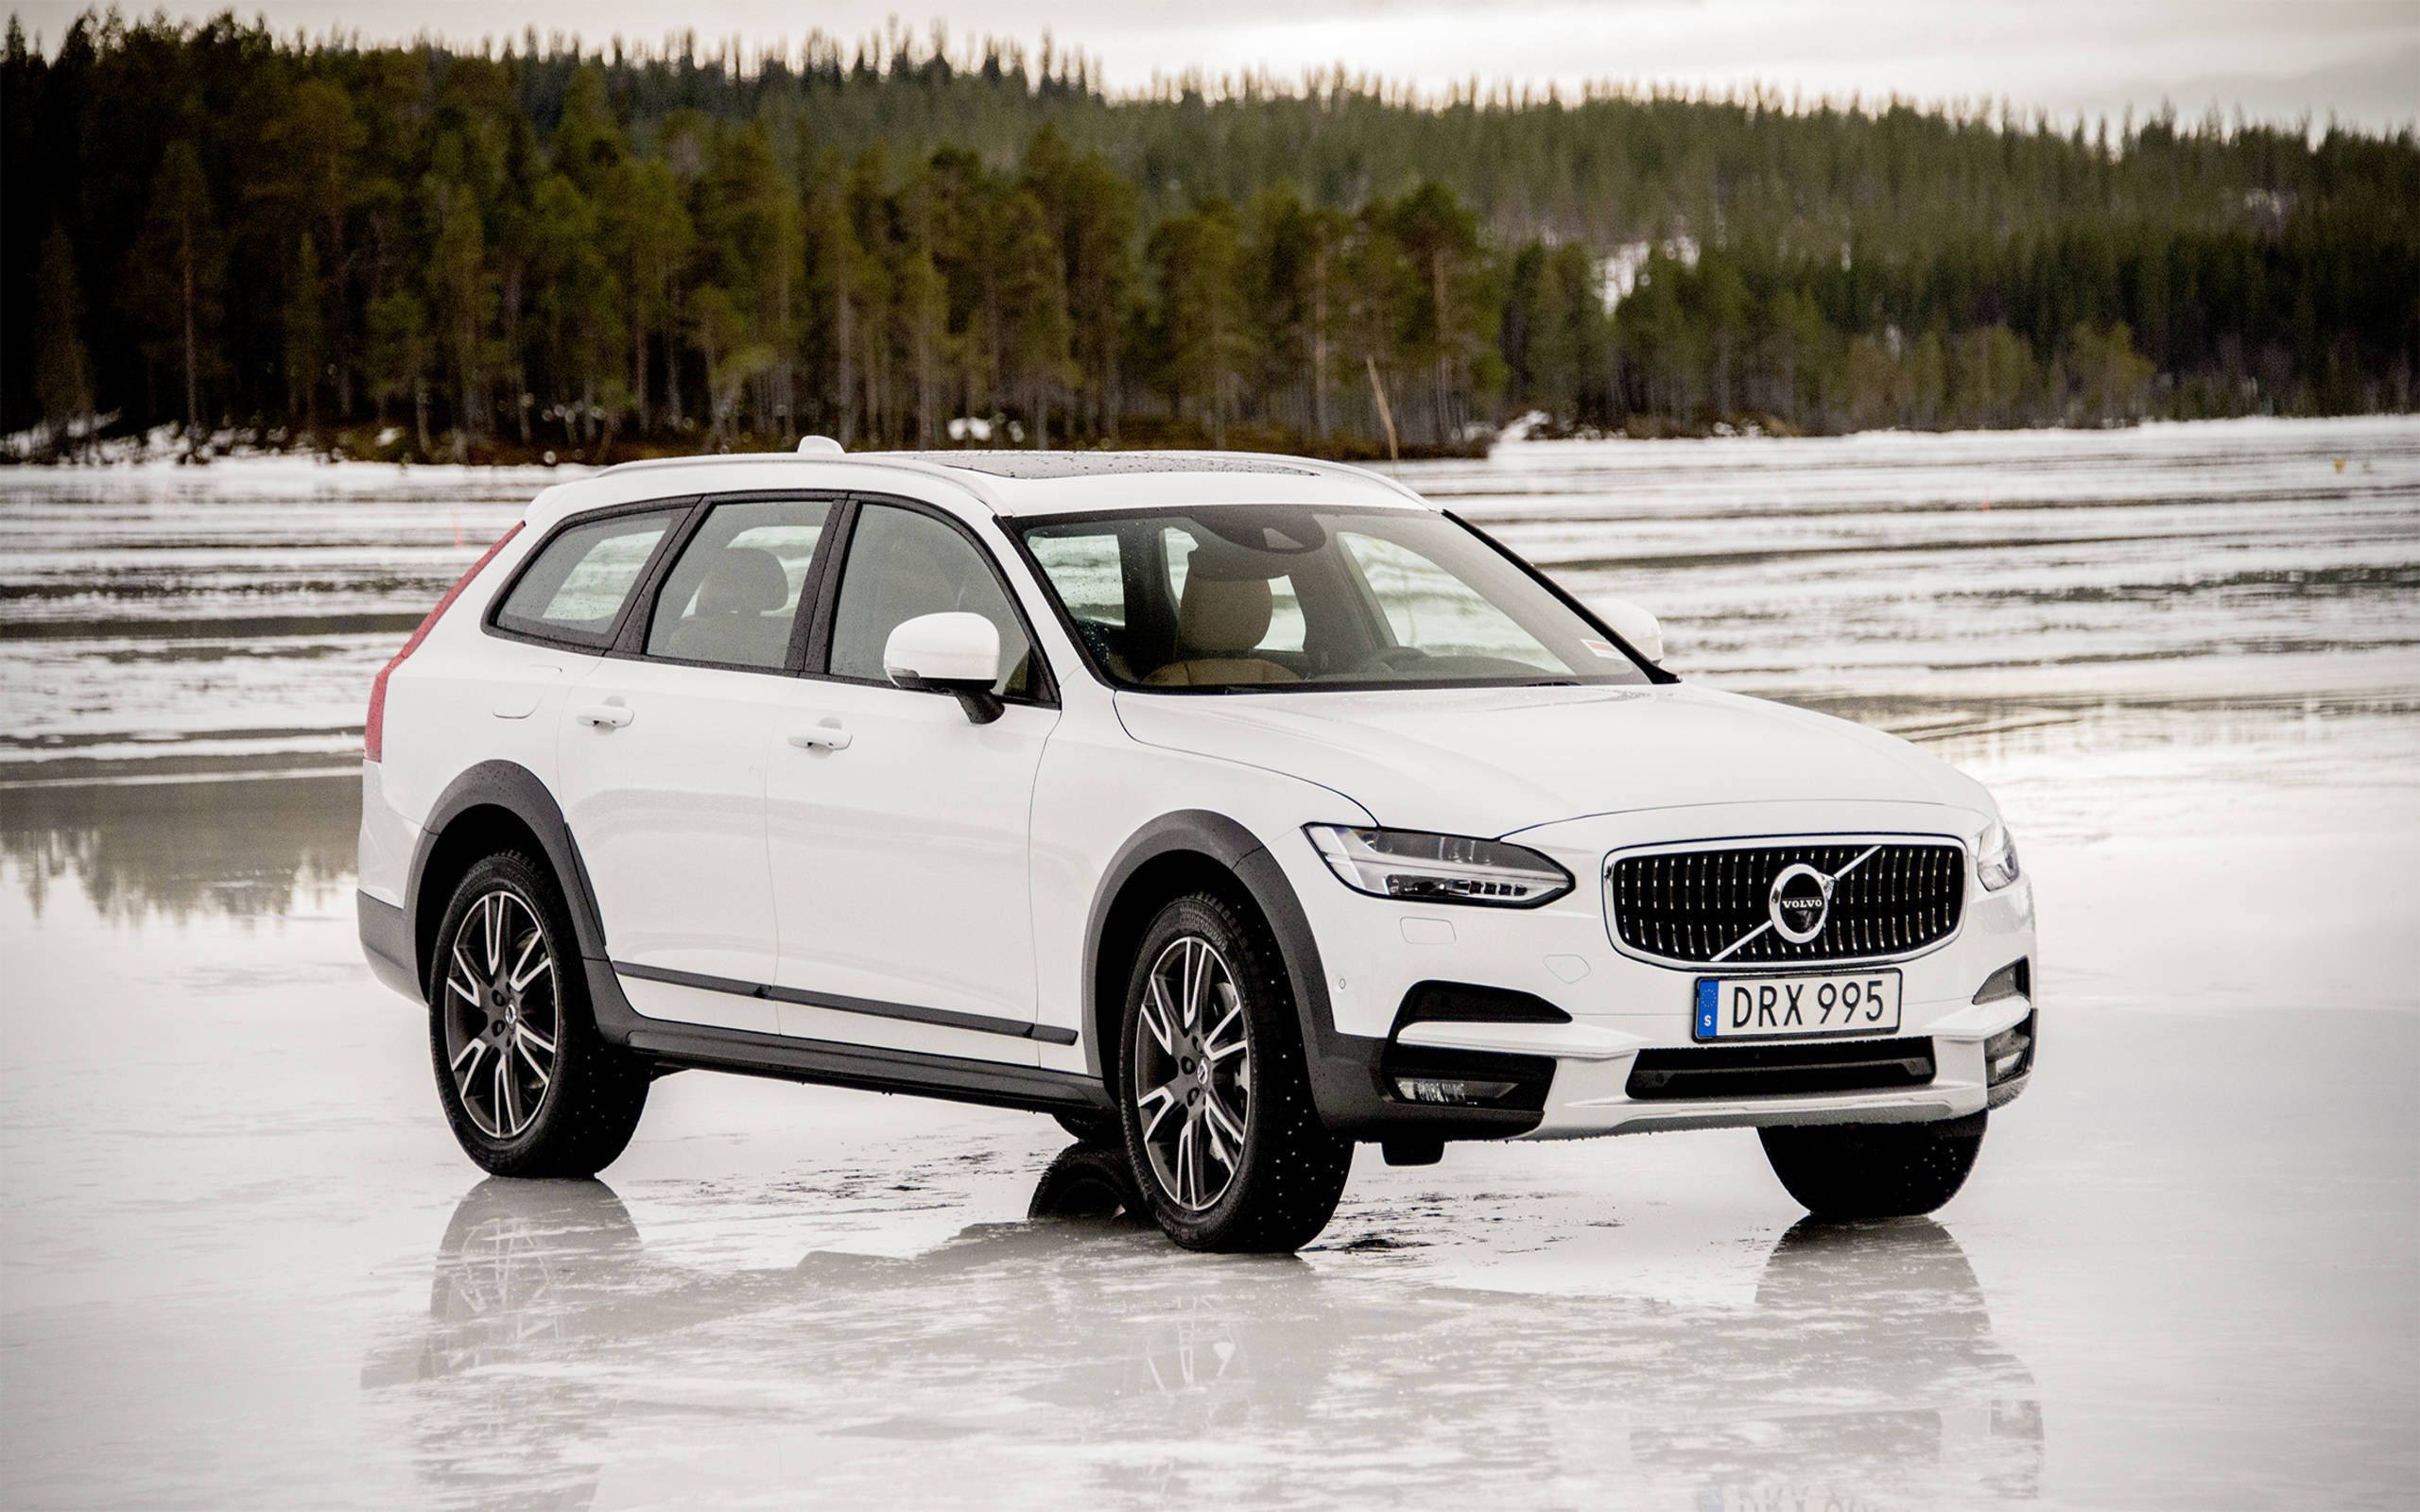 2017 Volvo V90 Cross Country first drive: Big Swedish wagons are back